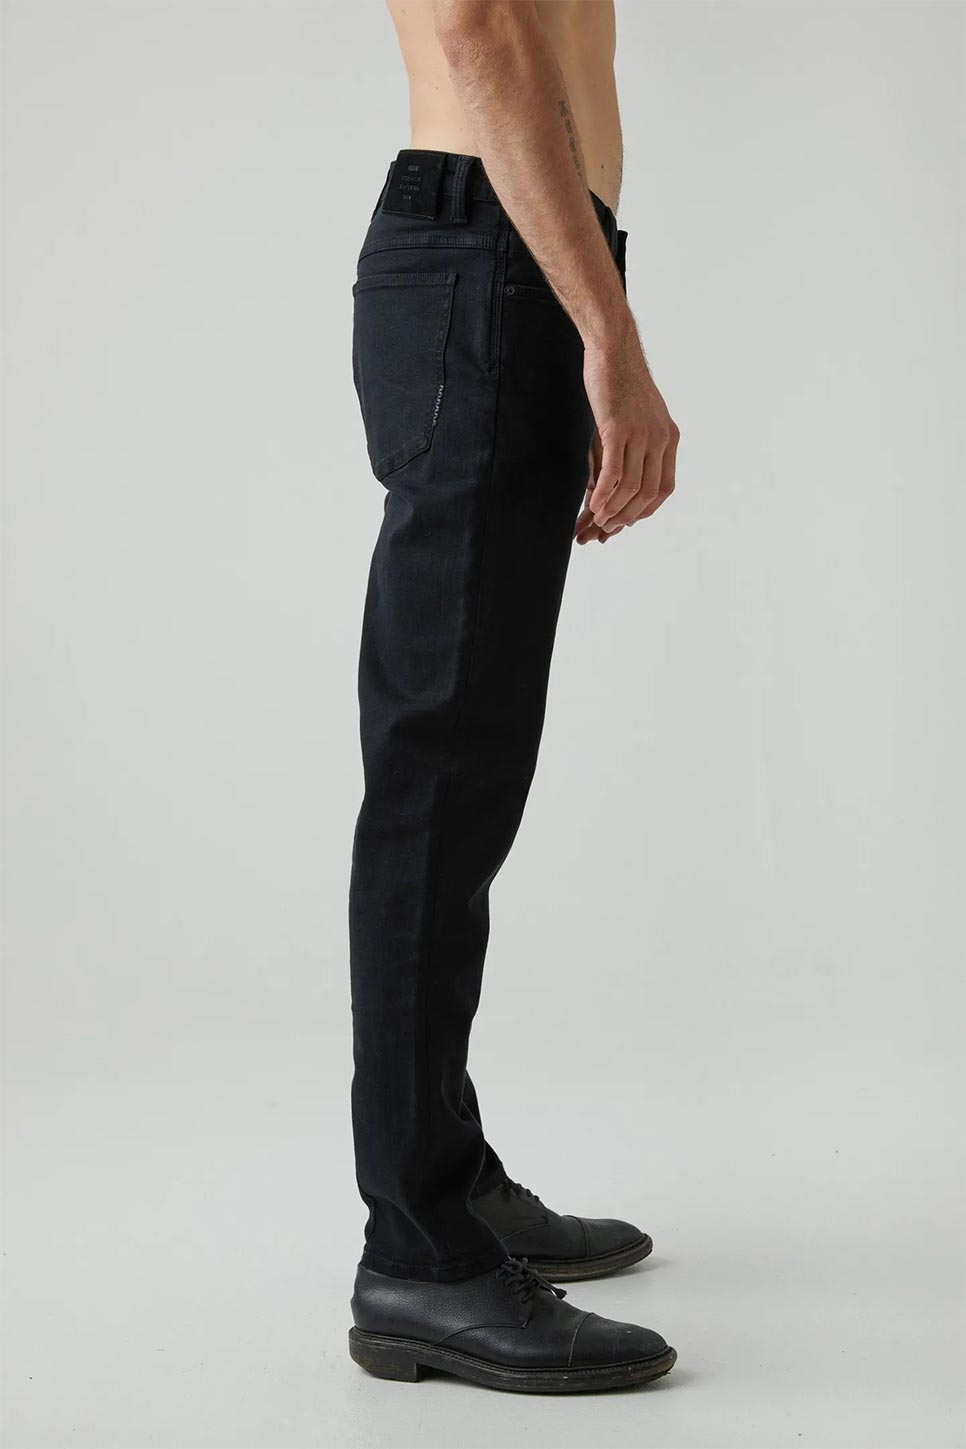 NEUW - Ray Tapered - Northern Black - Side